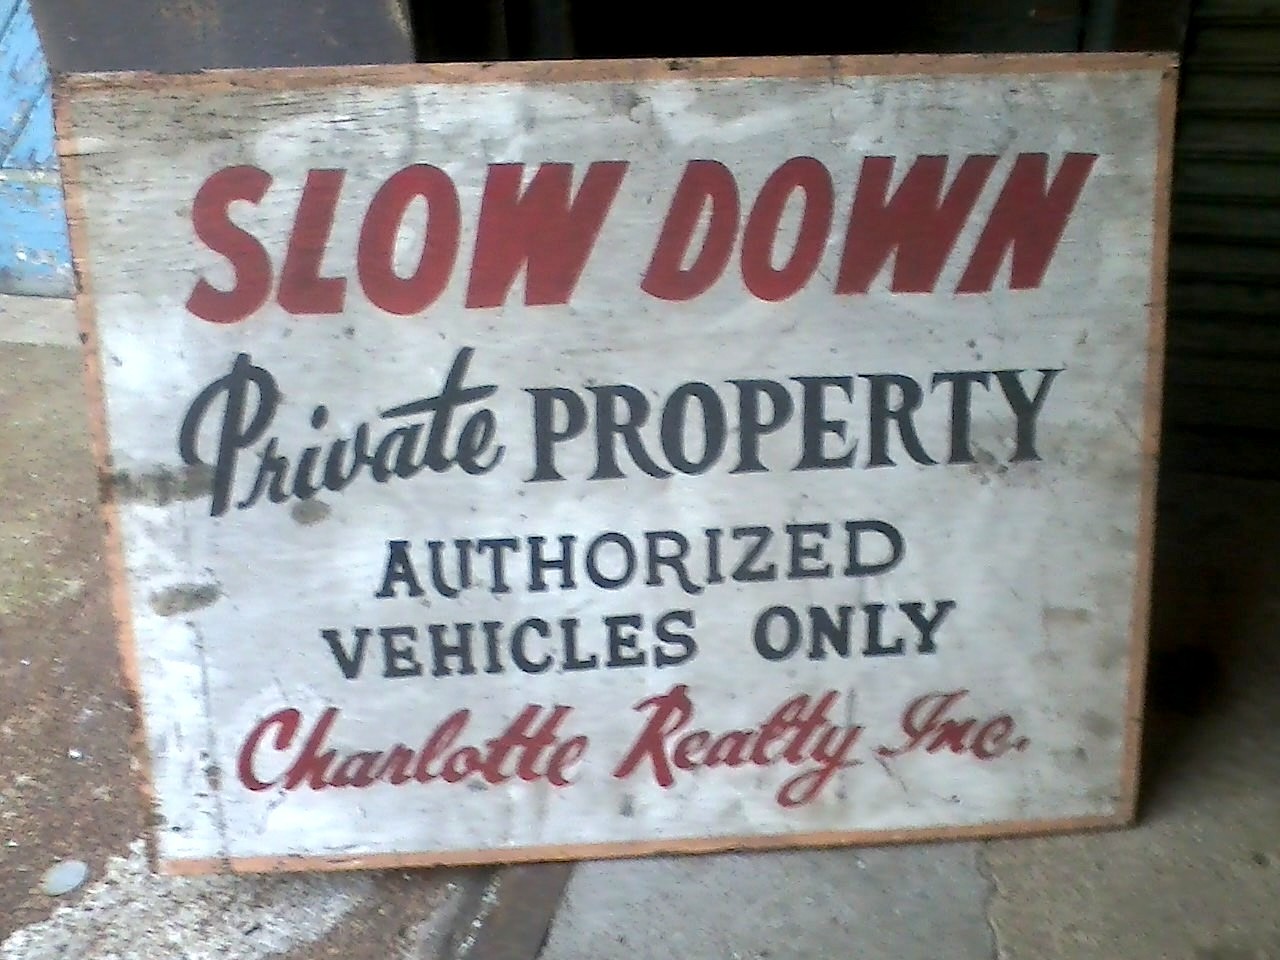 "SLOW DOWN / Private PROPERTY / AUTHORIZED VEHICLES ONLY / Charlotte Realty, Inc."